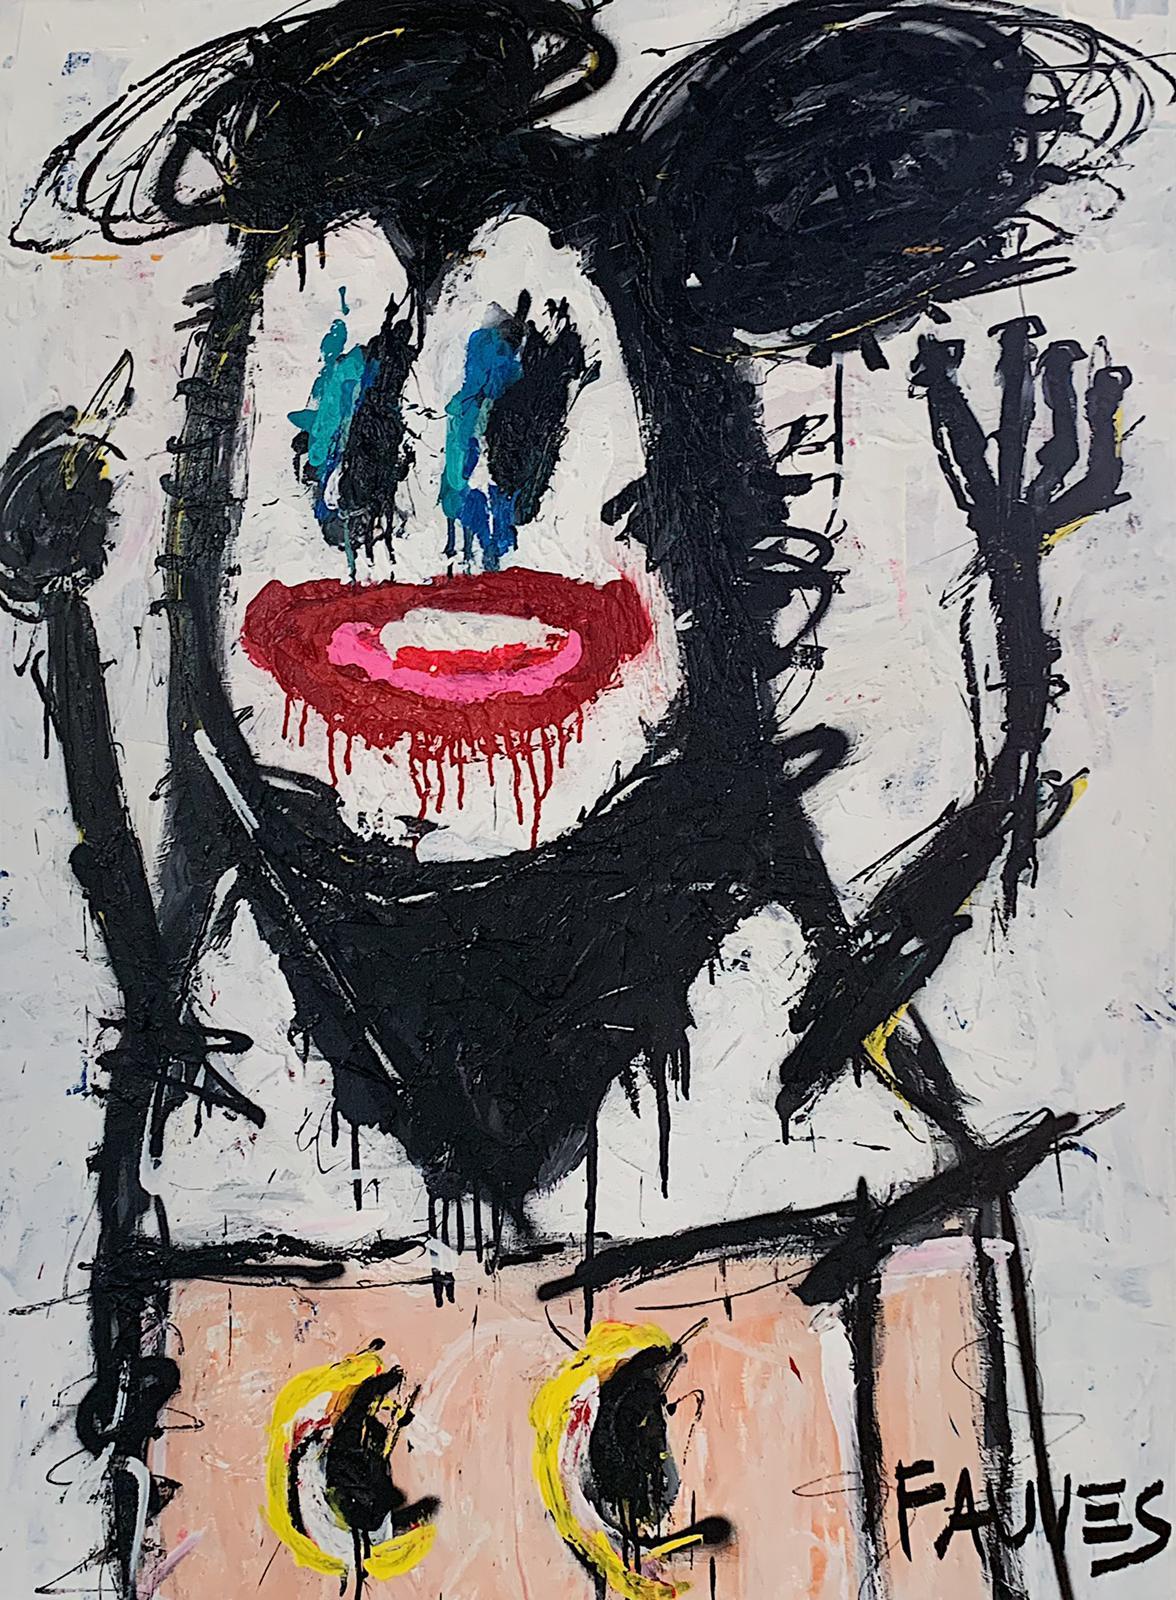 "RAT HOLE" Mixed media Painting 49x36 inch by John Paul Fauves  

2017
Mixed media, acrylic and oil on canvas 
49" × 36" inch 

ABOUT John Paul FAUVES: 
John Paul Fauves (born in 1980) is a contemporary Artist from Costa Rica . His artistic journey